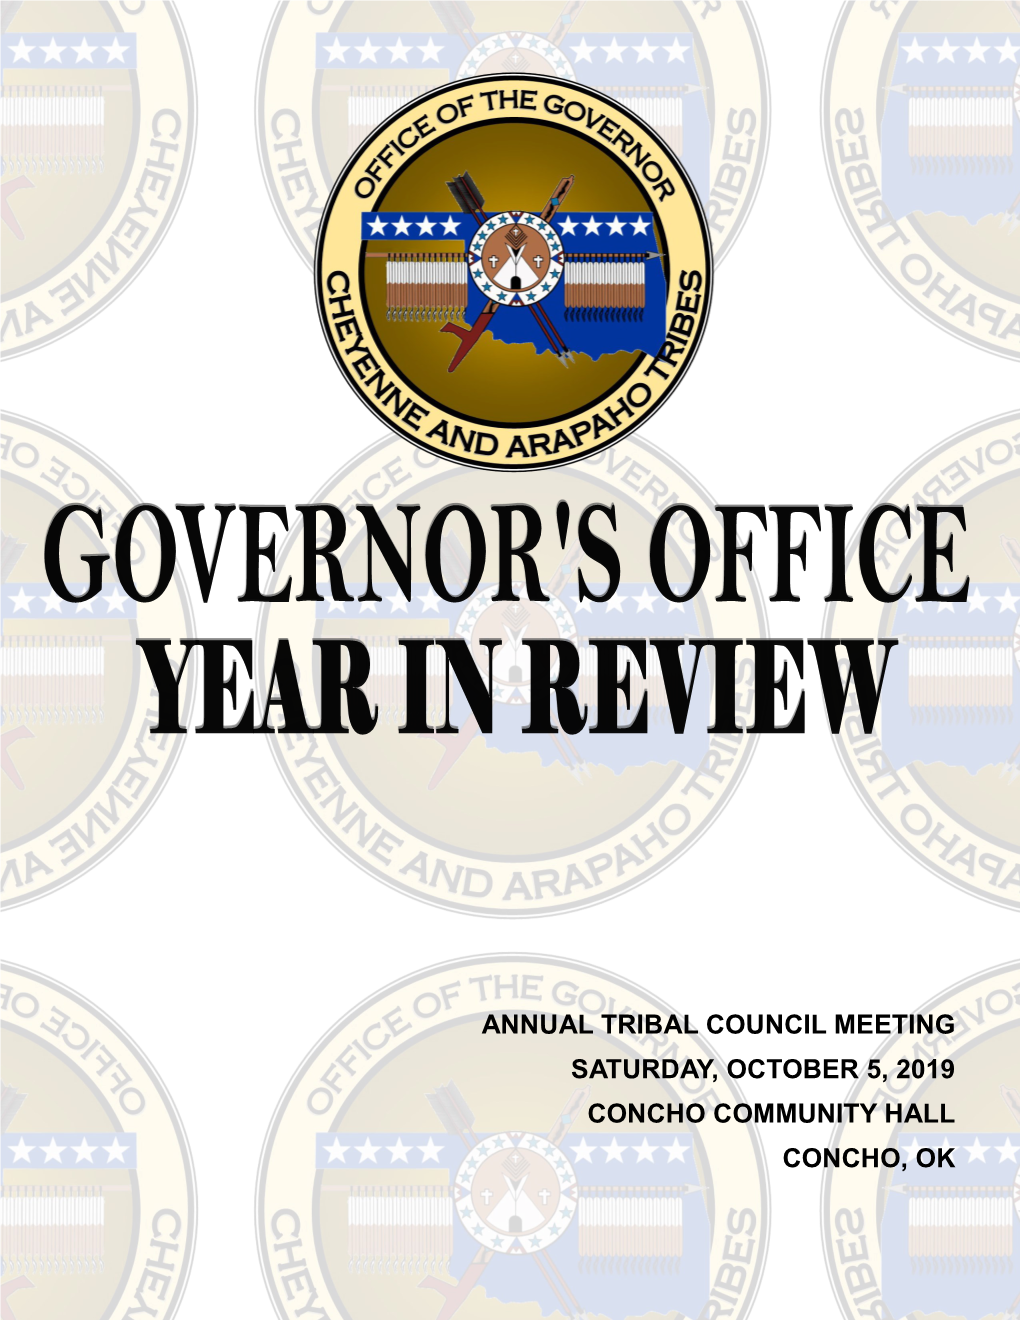 ANNUAL TRIBAL COUNCIL MEETING SATURDAY, OCTOBER 5, 2019 CONCHO COMMUNITY HALL CONCHO, OK Governor’S Letter to the People Tribal Members